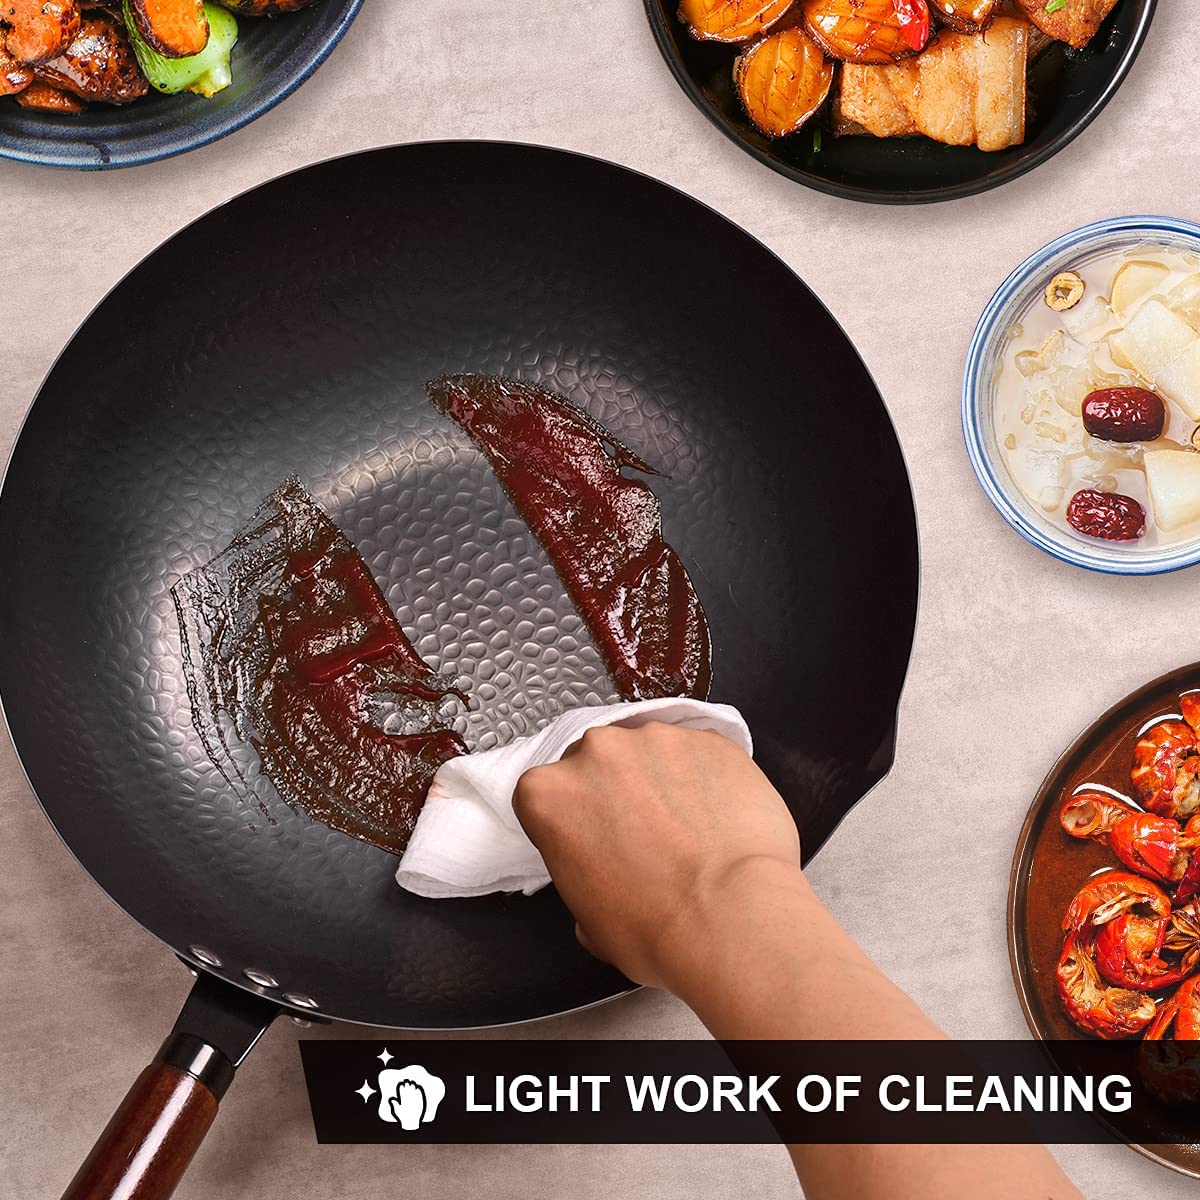 Wok Pan with Lid - 13 Nonstick Wok, Carbon Steel Woks & Stir-Fry Pans Set  with 7 Cookwares, No Chemical Coated Flat Bottom Chinese wok, for Electric